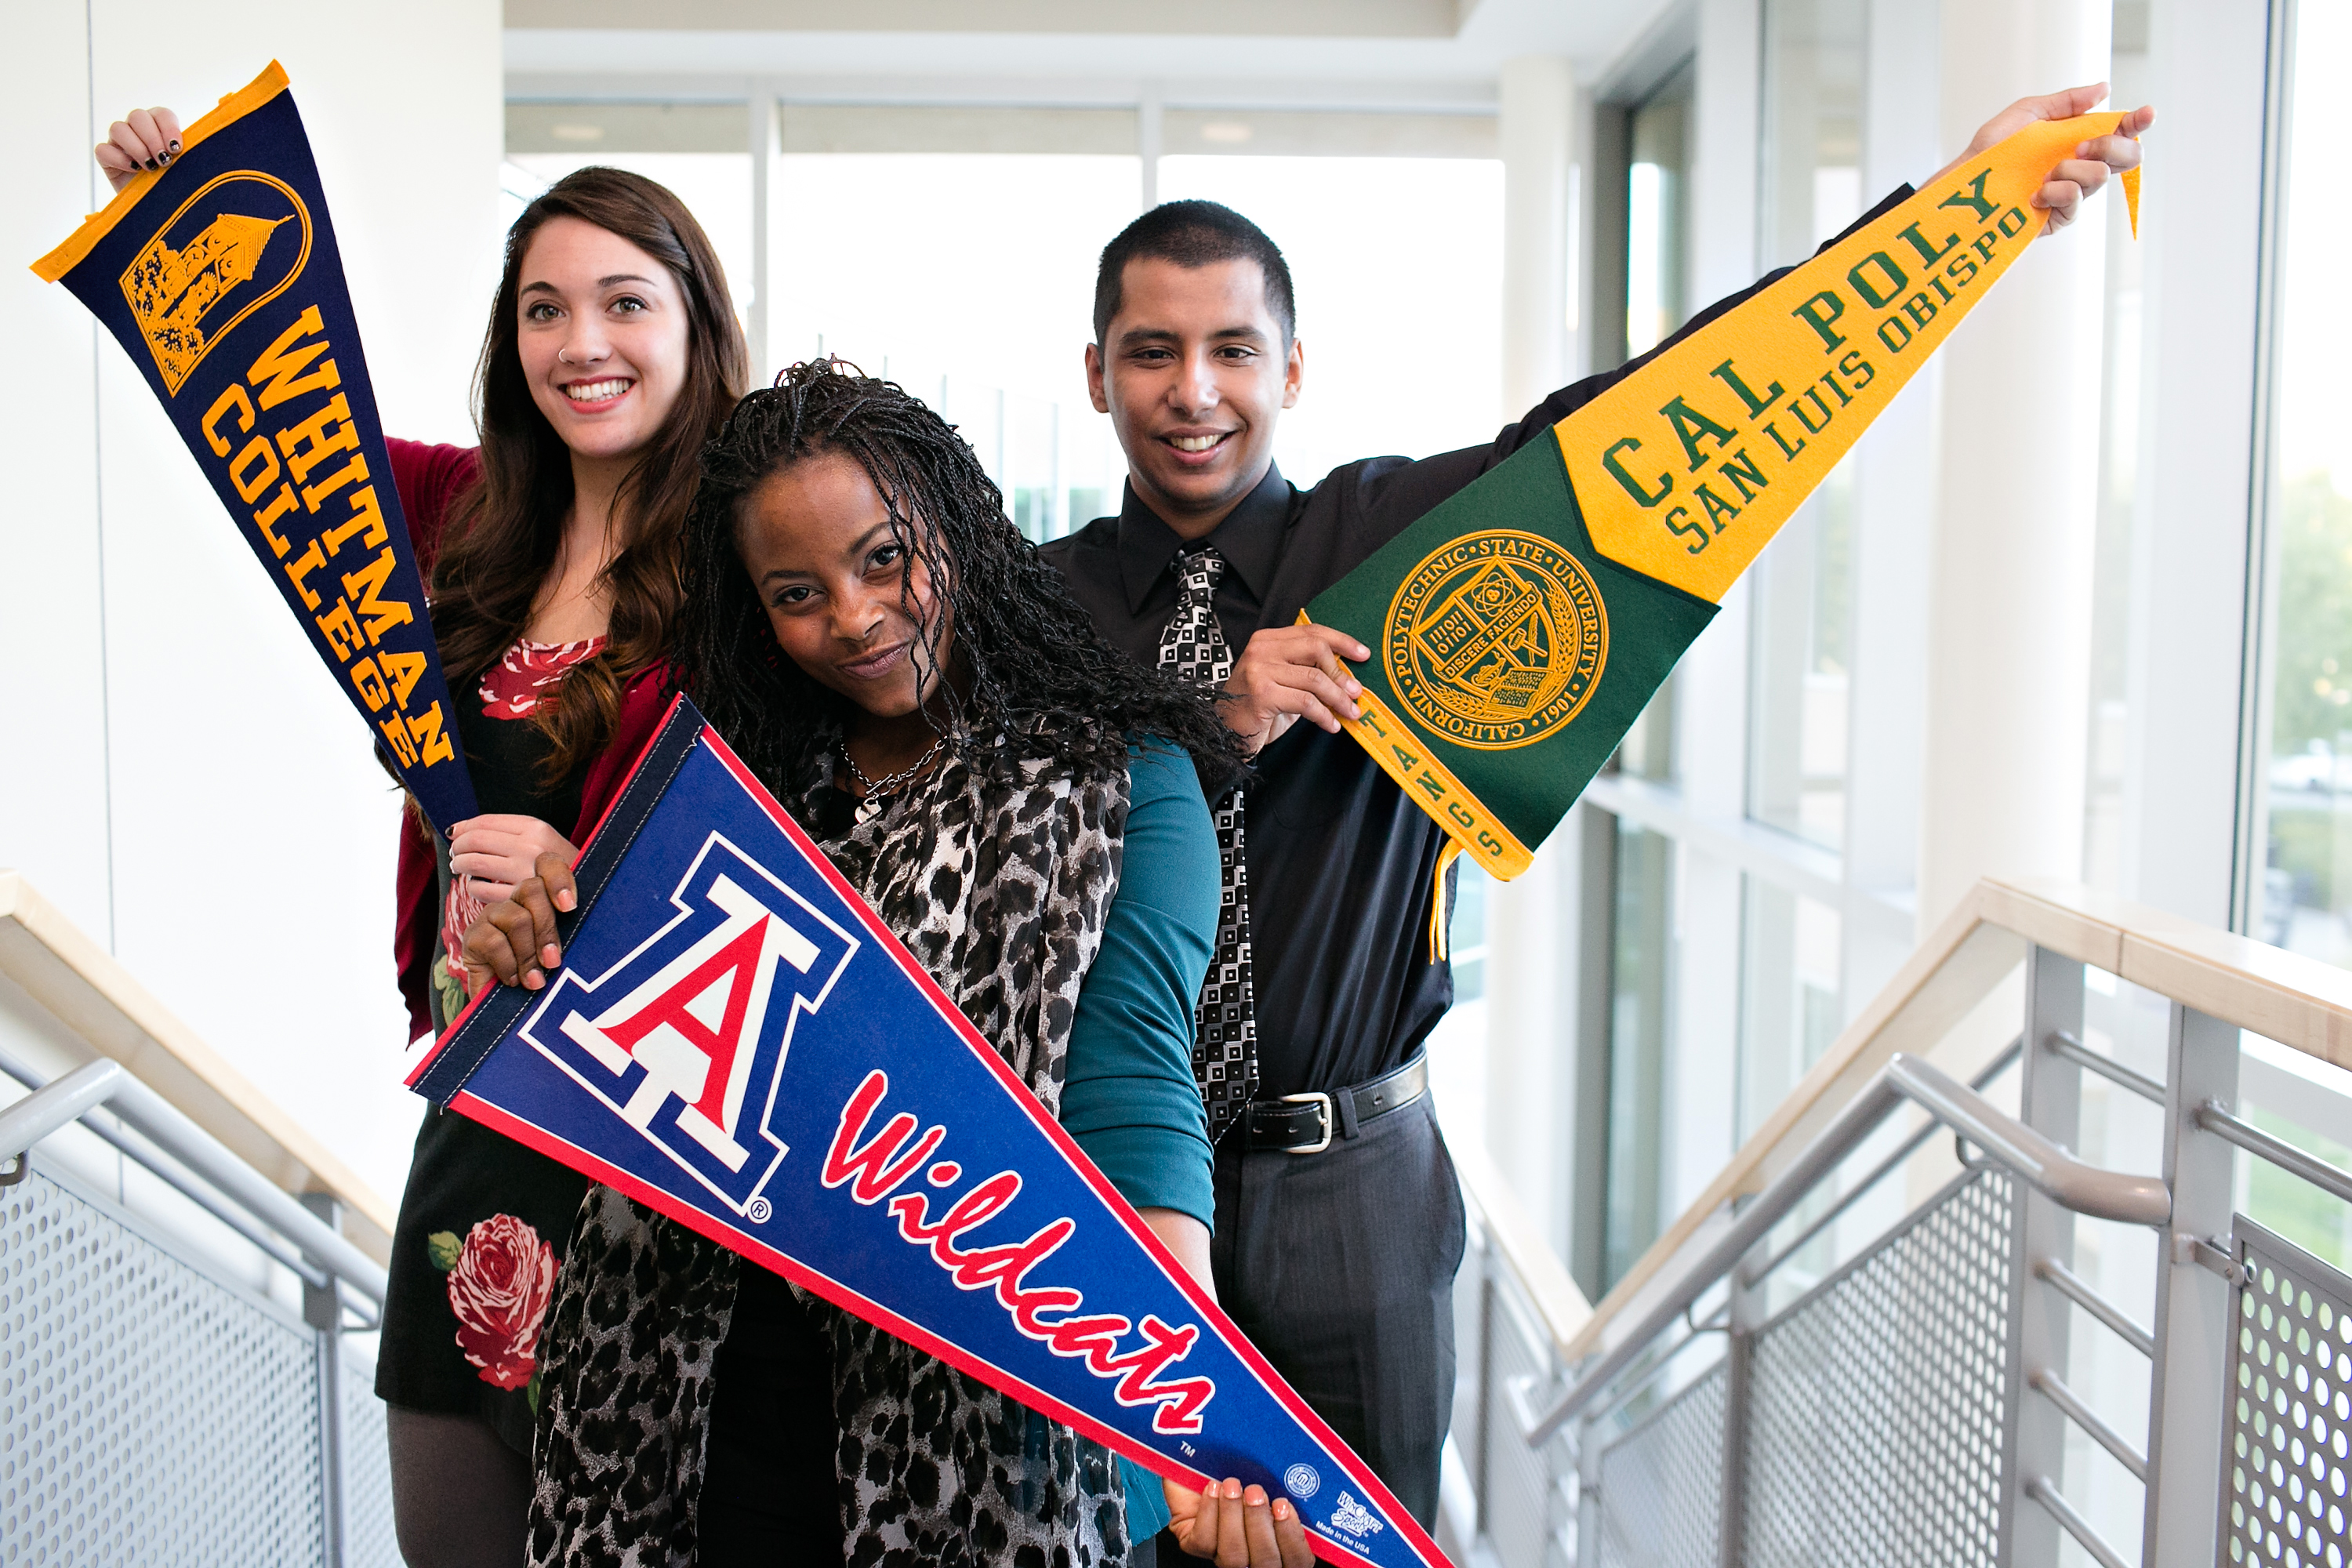 Earl Woods Scholars with pennants